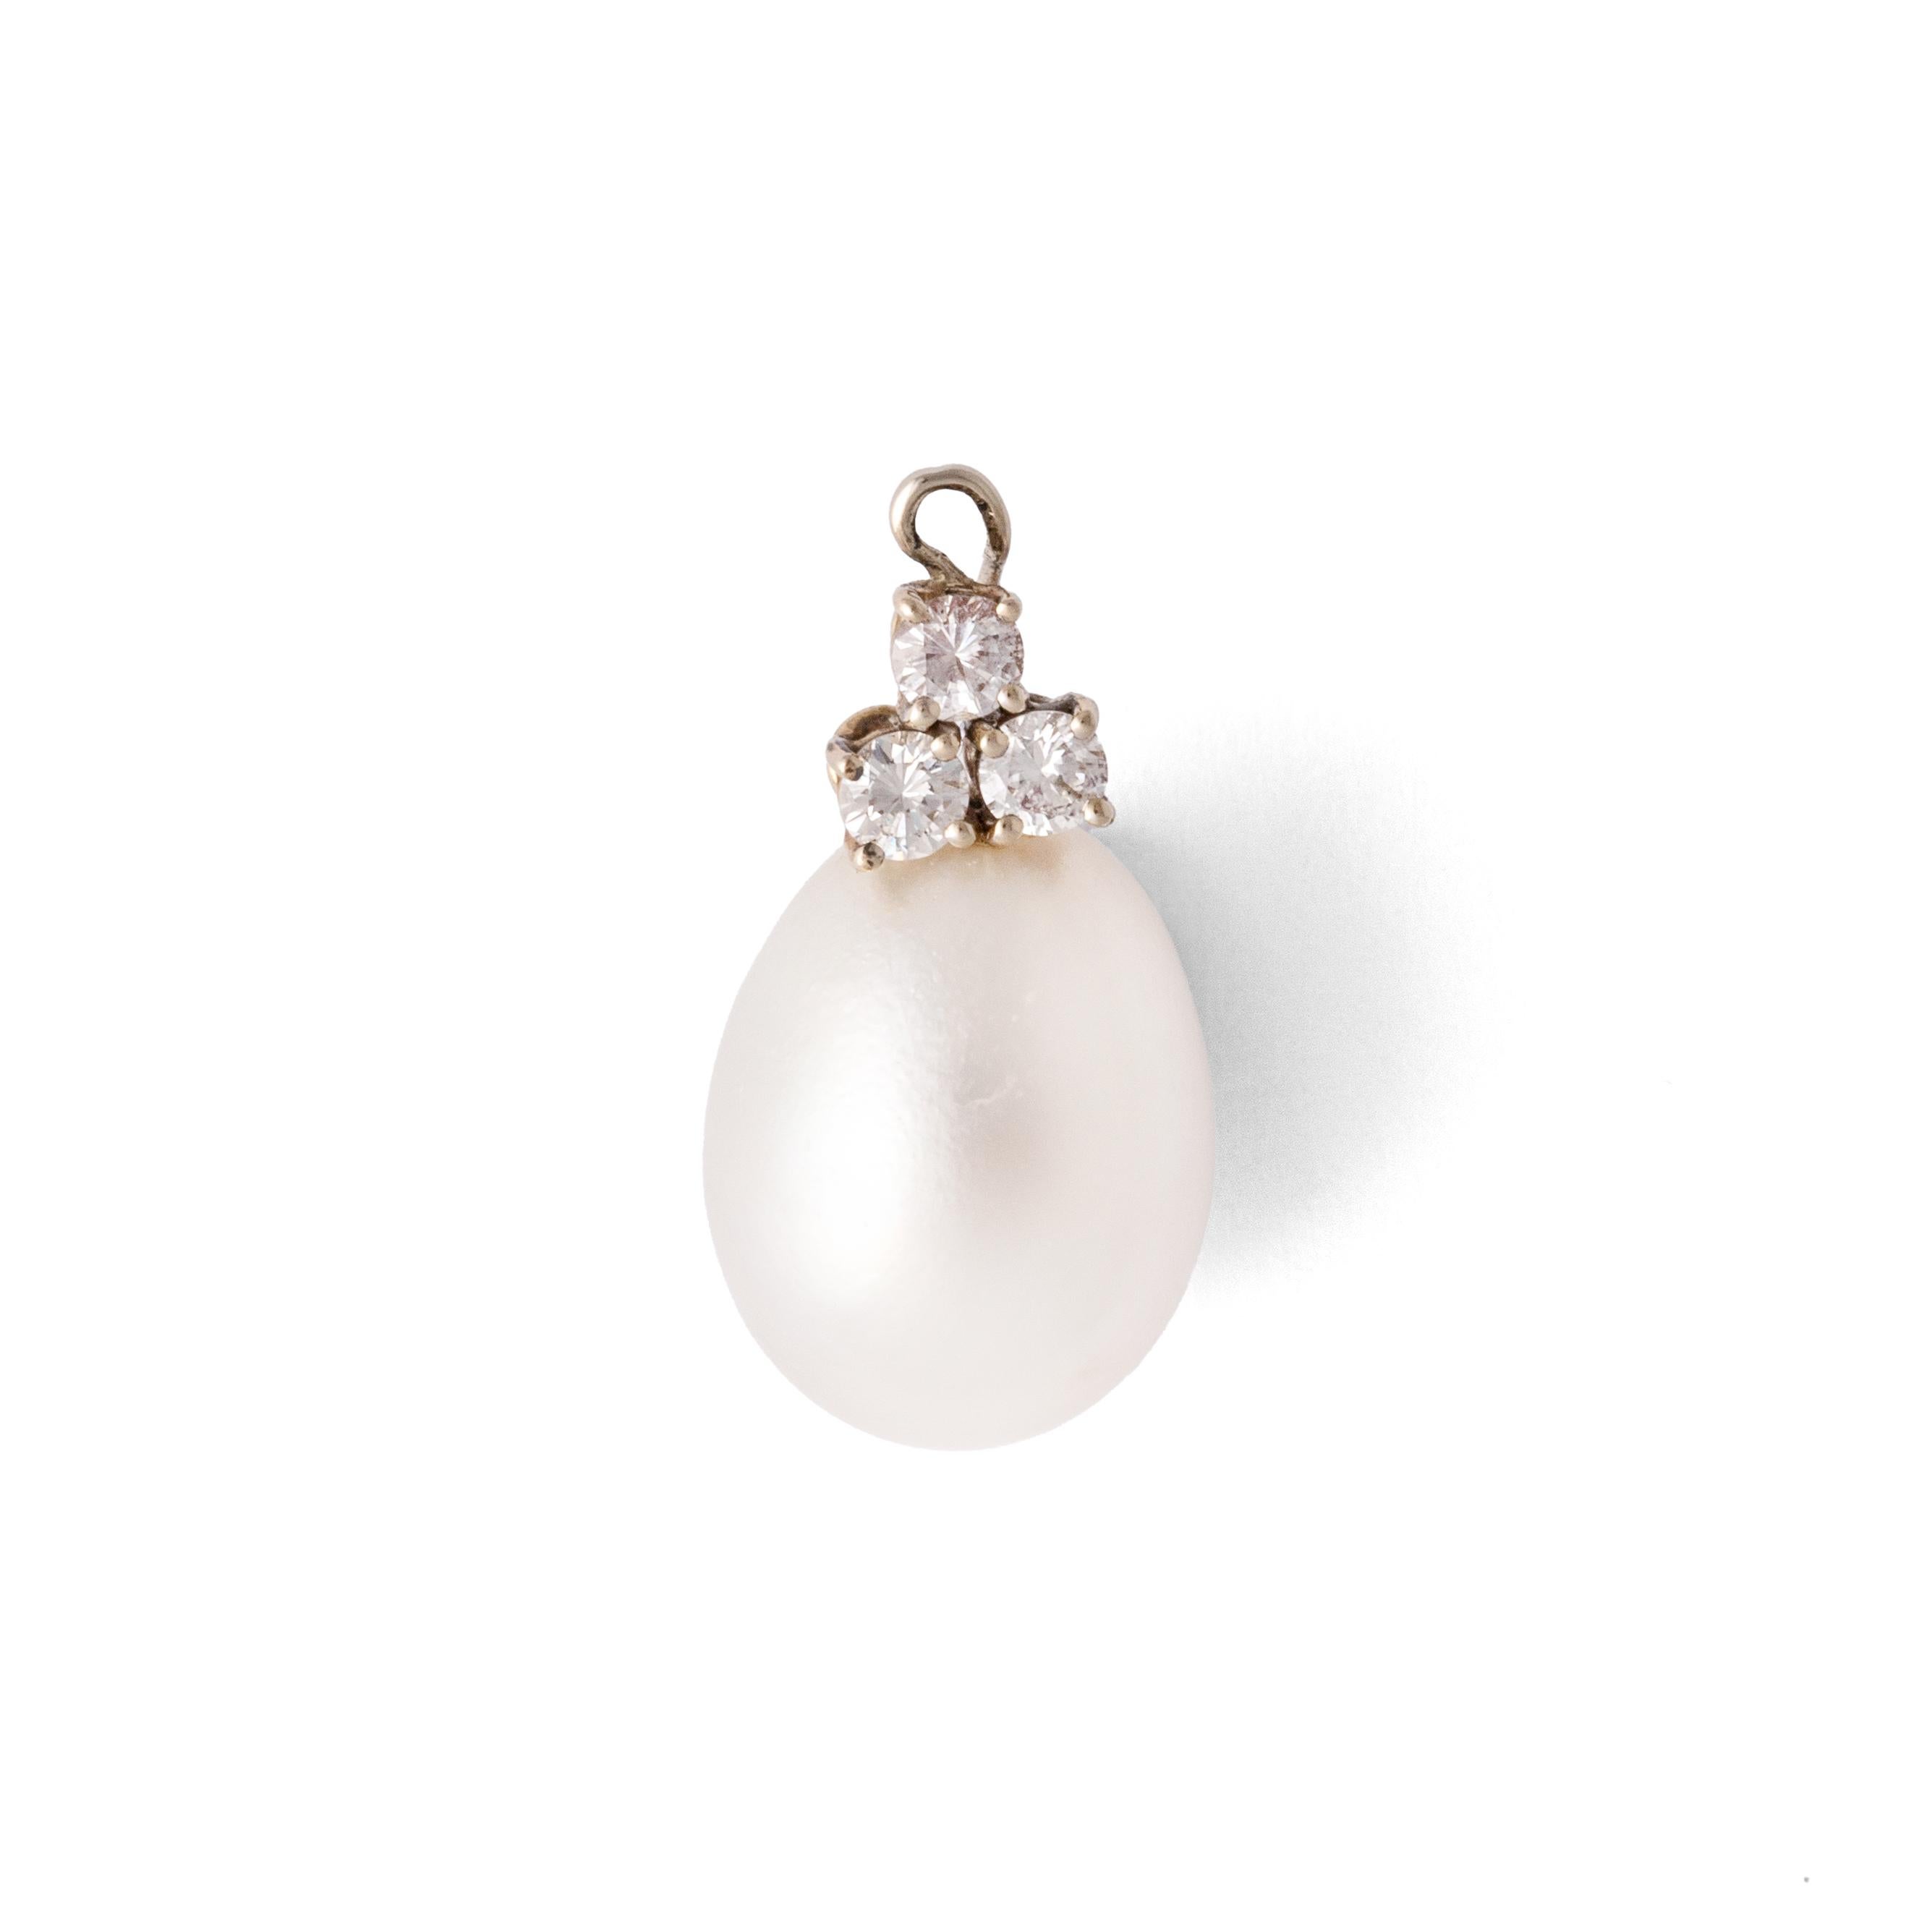 Cultured Pearl Diamond White Gold Pendant.

Introducing a captivating union of elegance and natural beauty – the Cultured Pearl Diamond White Gold Pendant. This exquisite piece is a celebration of the ocean’s allure, featuring a genuine seawater